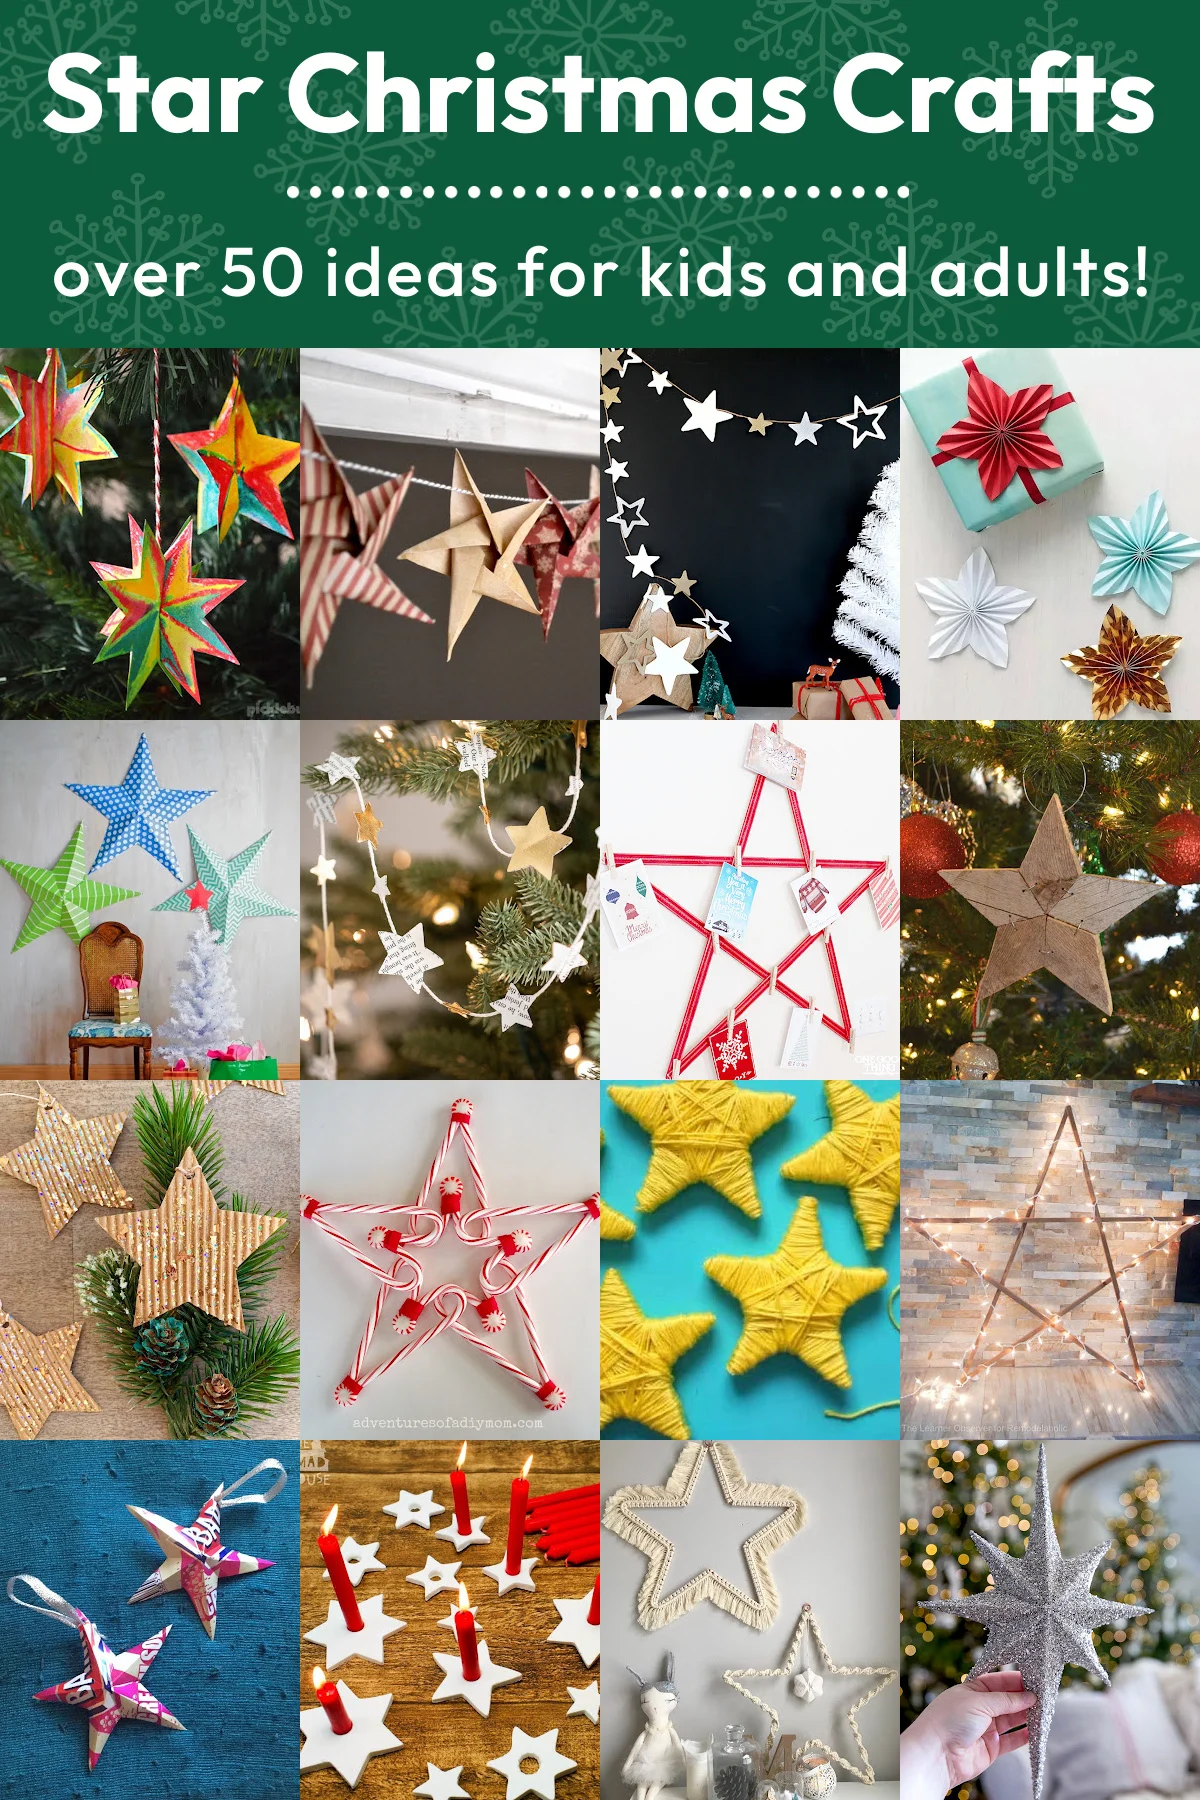 Star Christmas Crafts for Kids and Adults - DIY Candy